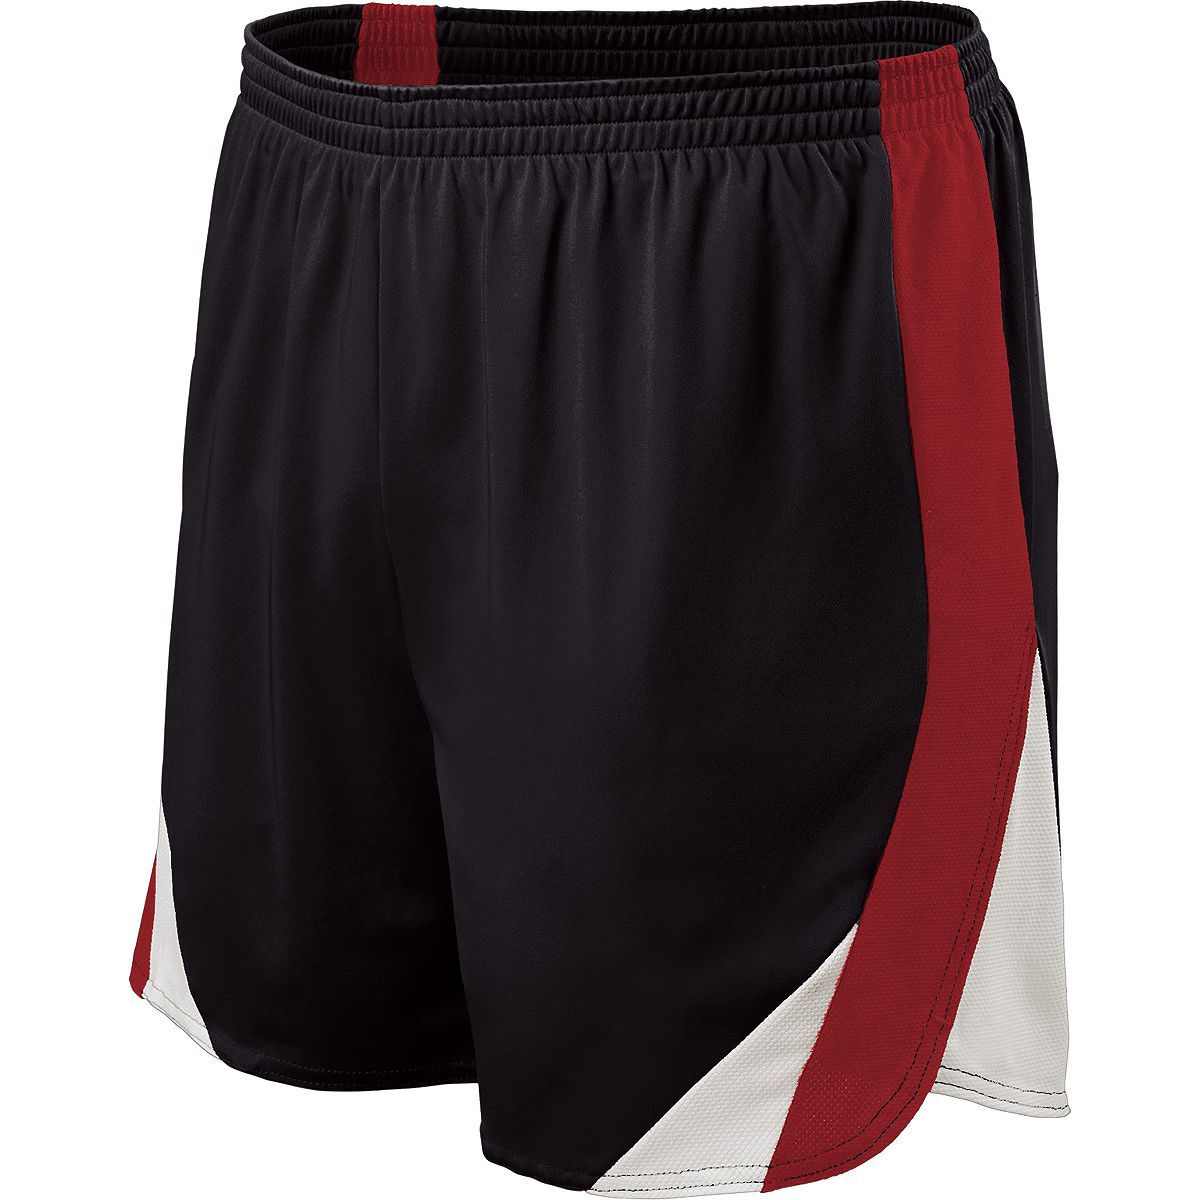 Holloway Approach Shorts in Black/Scarlet/White  -Part of the Adult, Adult-Shorts, Track-Field, Holloway product lines at KanaleyCreations.com